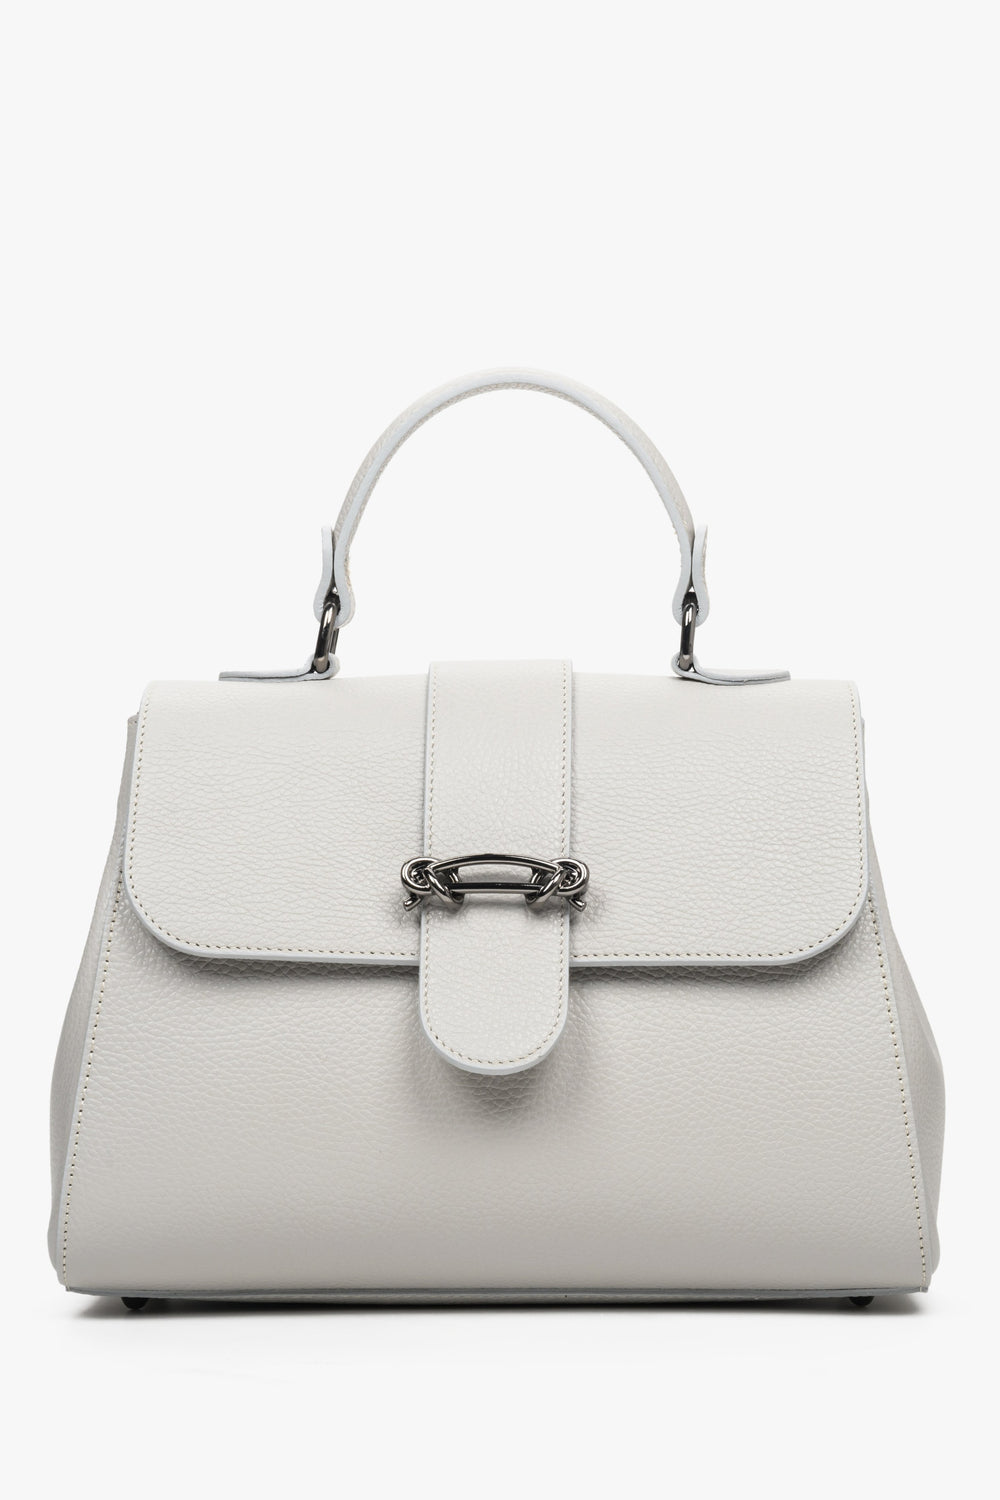 Estro grey women's handbag with a buckle made of Italian natural leather.